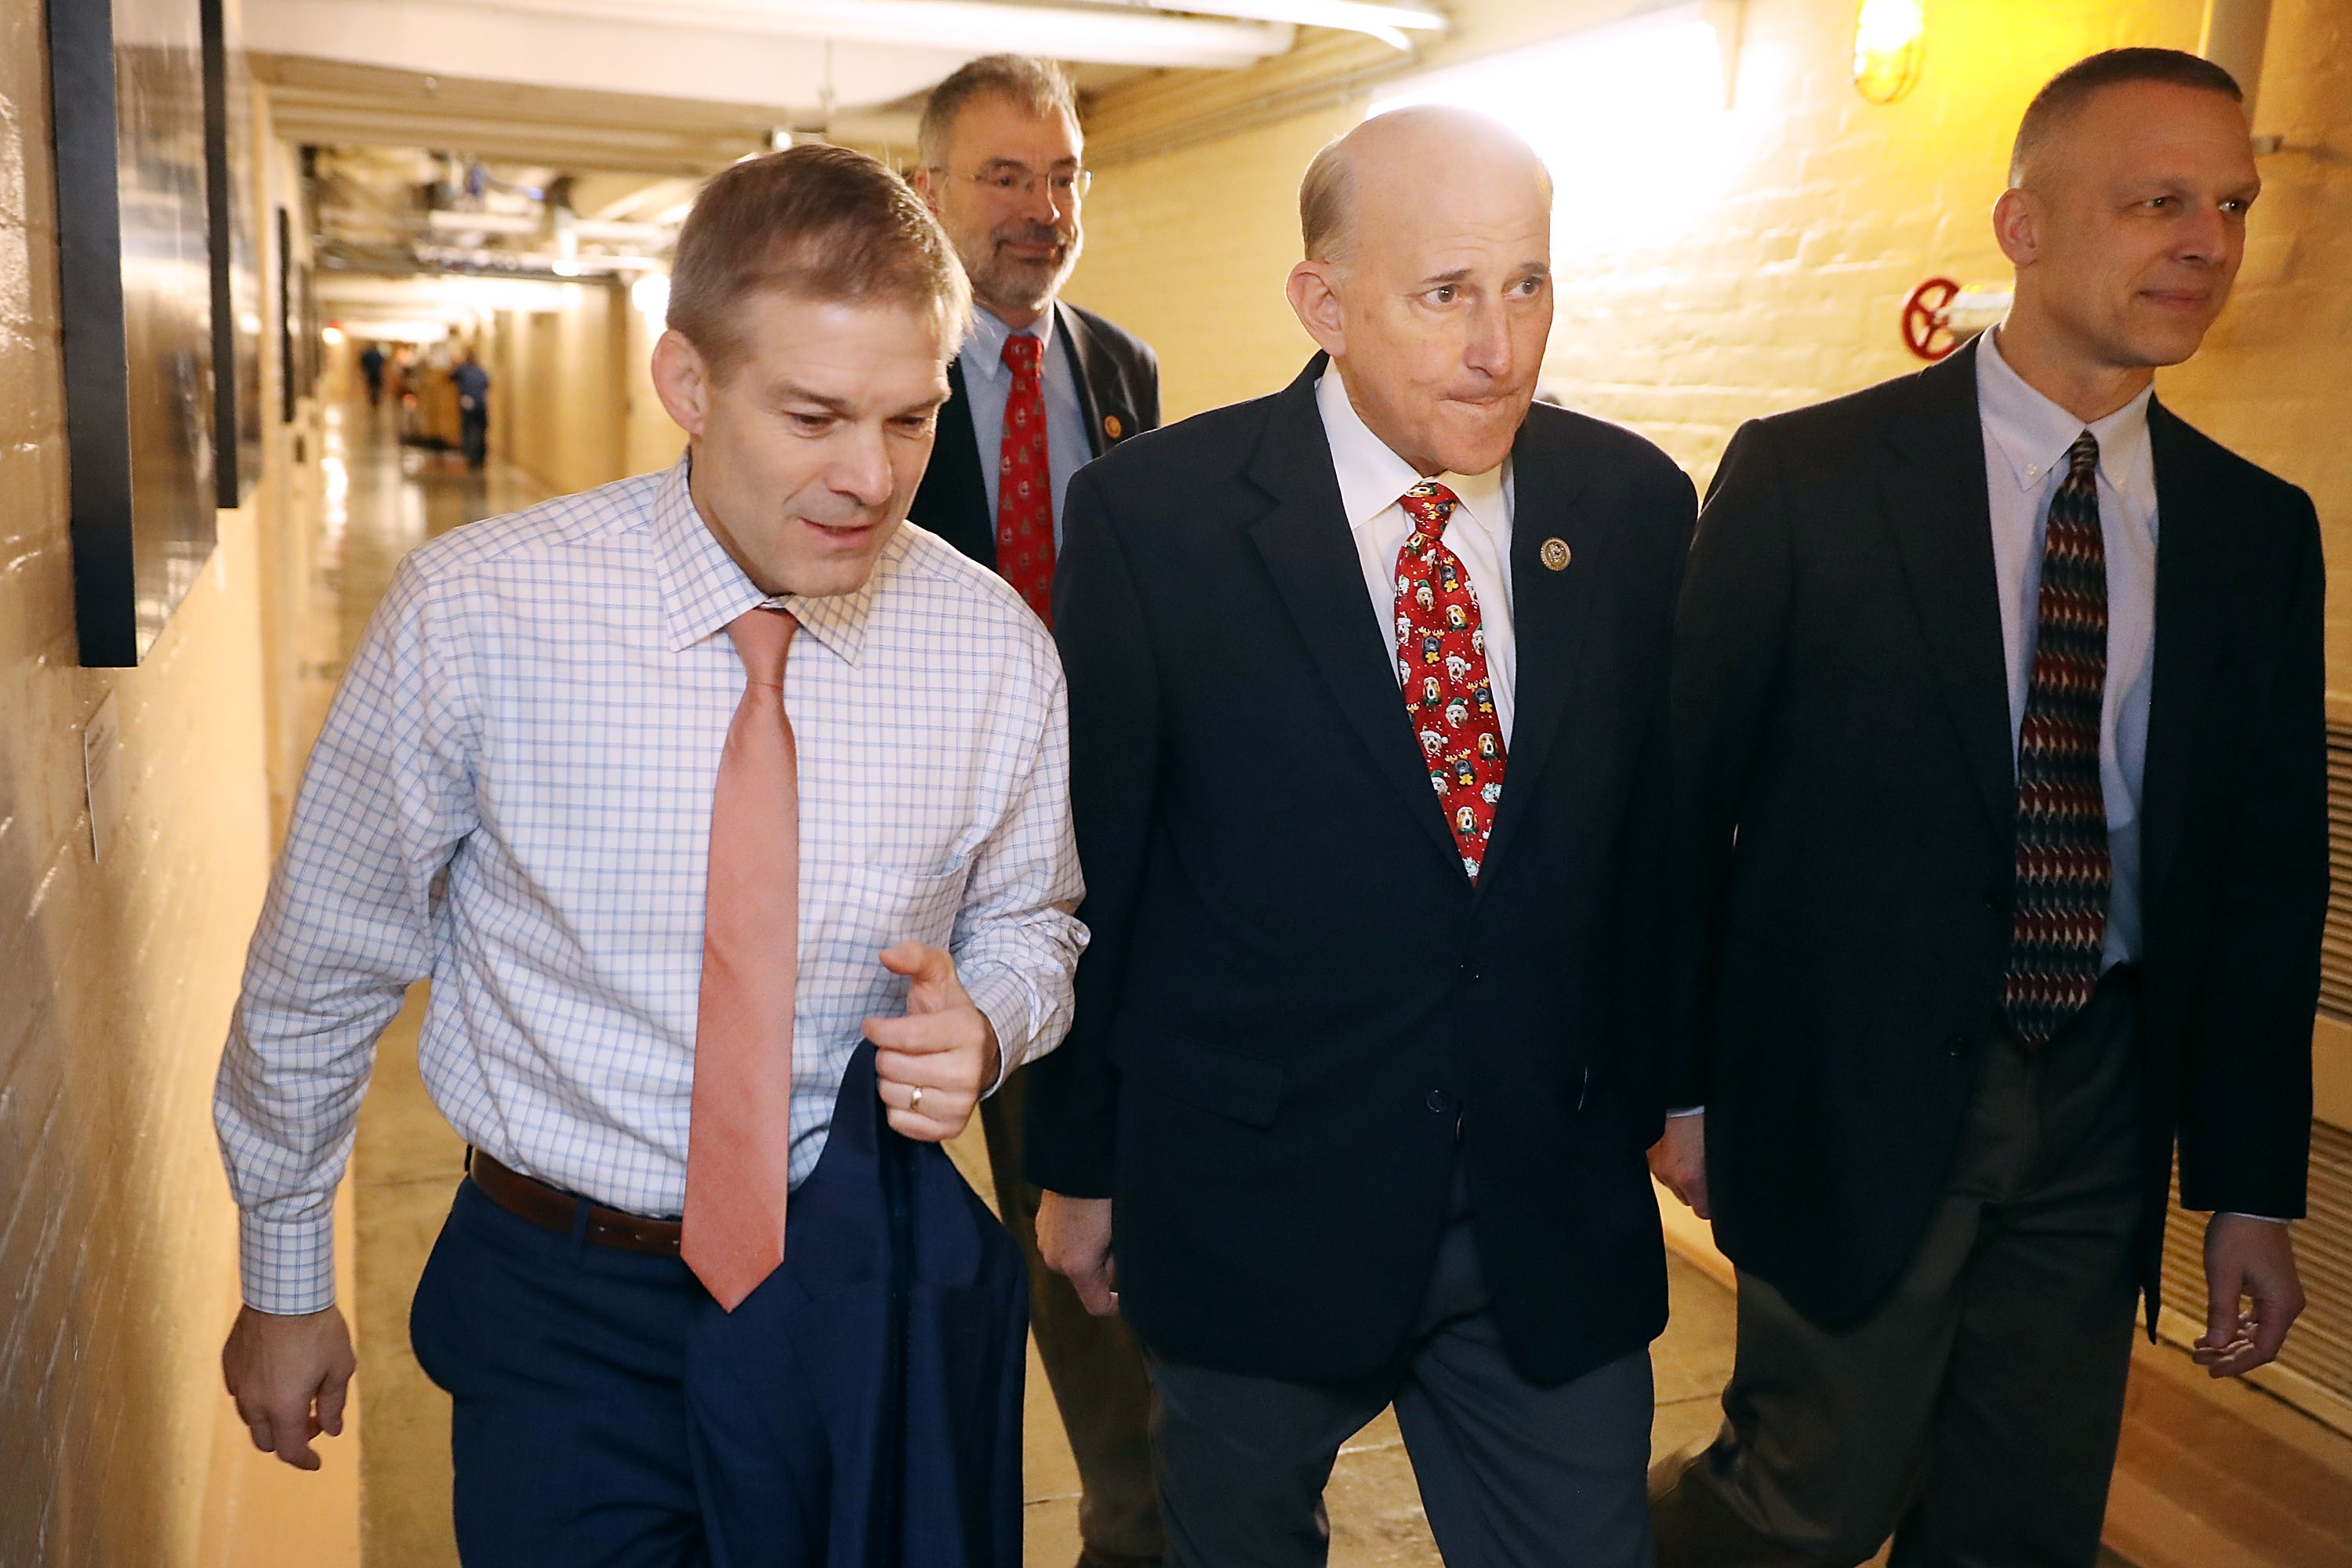 Members of the House Freedom Caucus Rep. Jim Jordan, Rep. Louie Gohmert arrive for a House Republican Conference meeting in the basement of the U.S. Capitol December 18, 2017 in Washington, DC. (Photo by Chip Somodevilla/Getty Images)